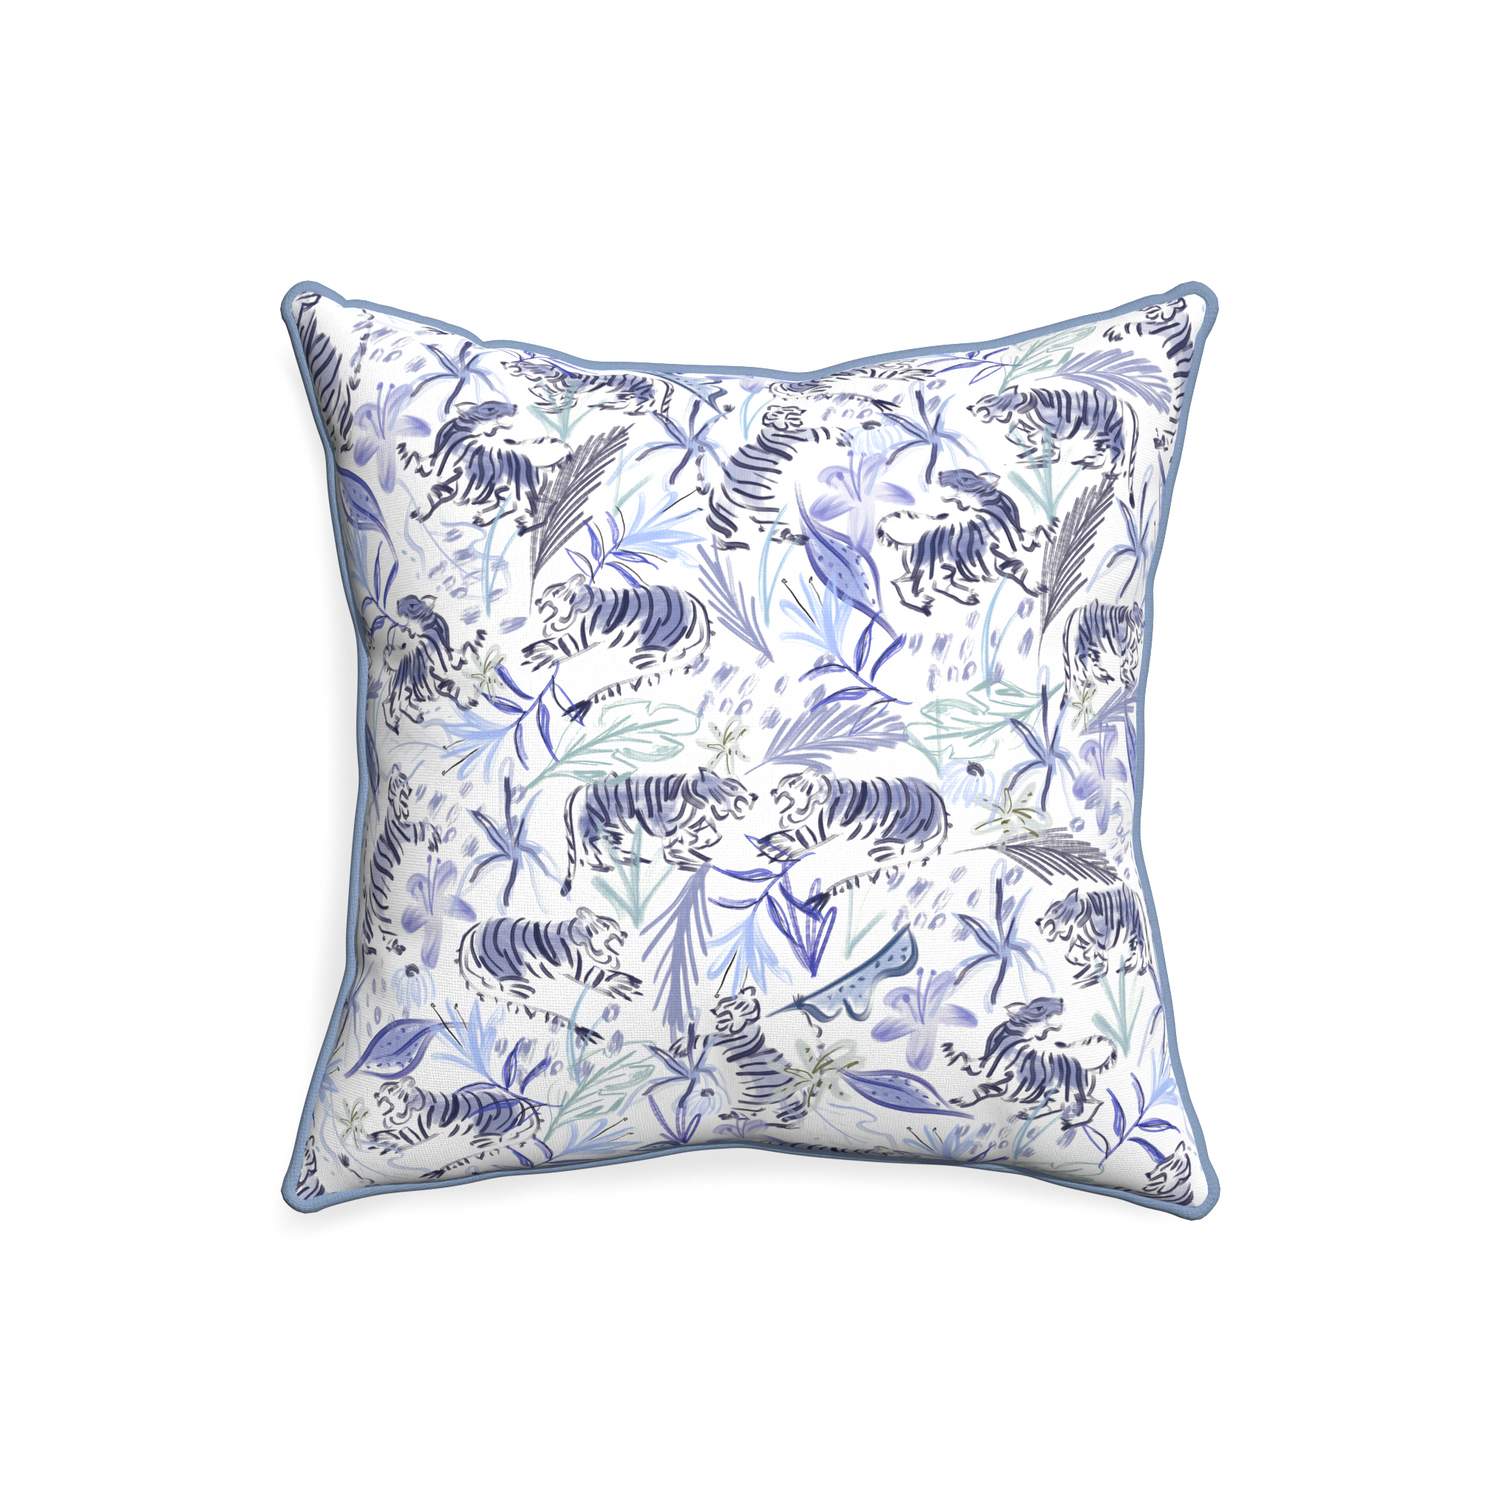 20-square frida blue custom blue with intricate tiger designpillow with sky piping on white background